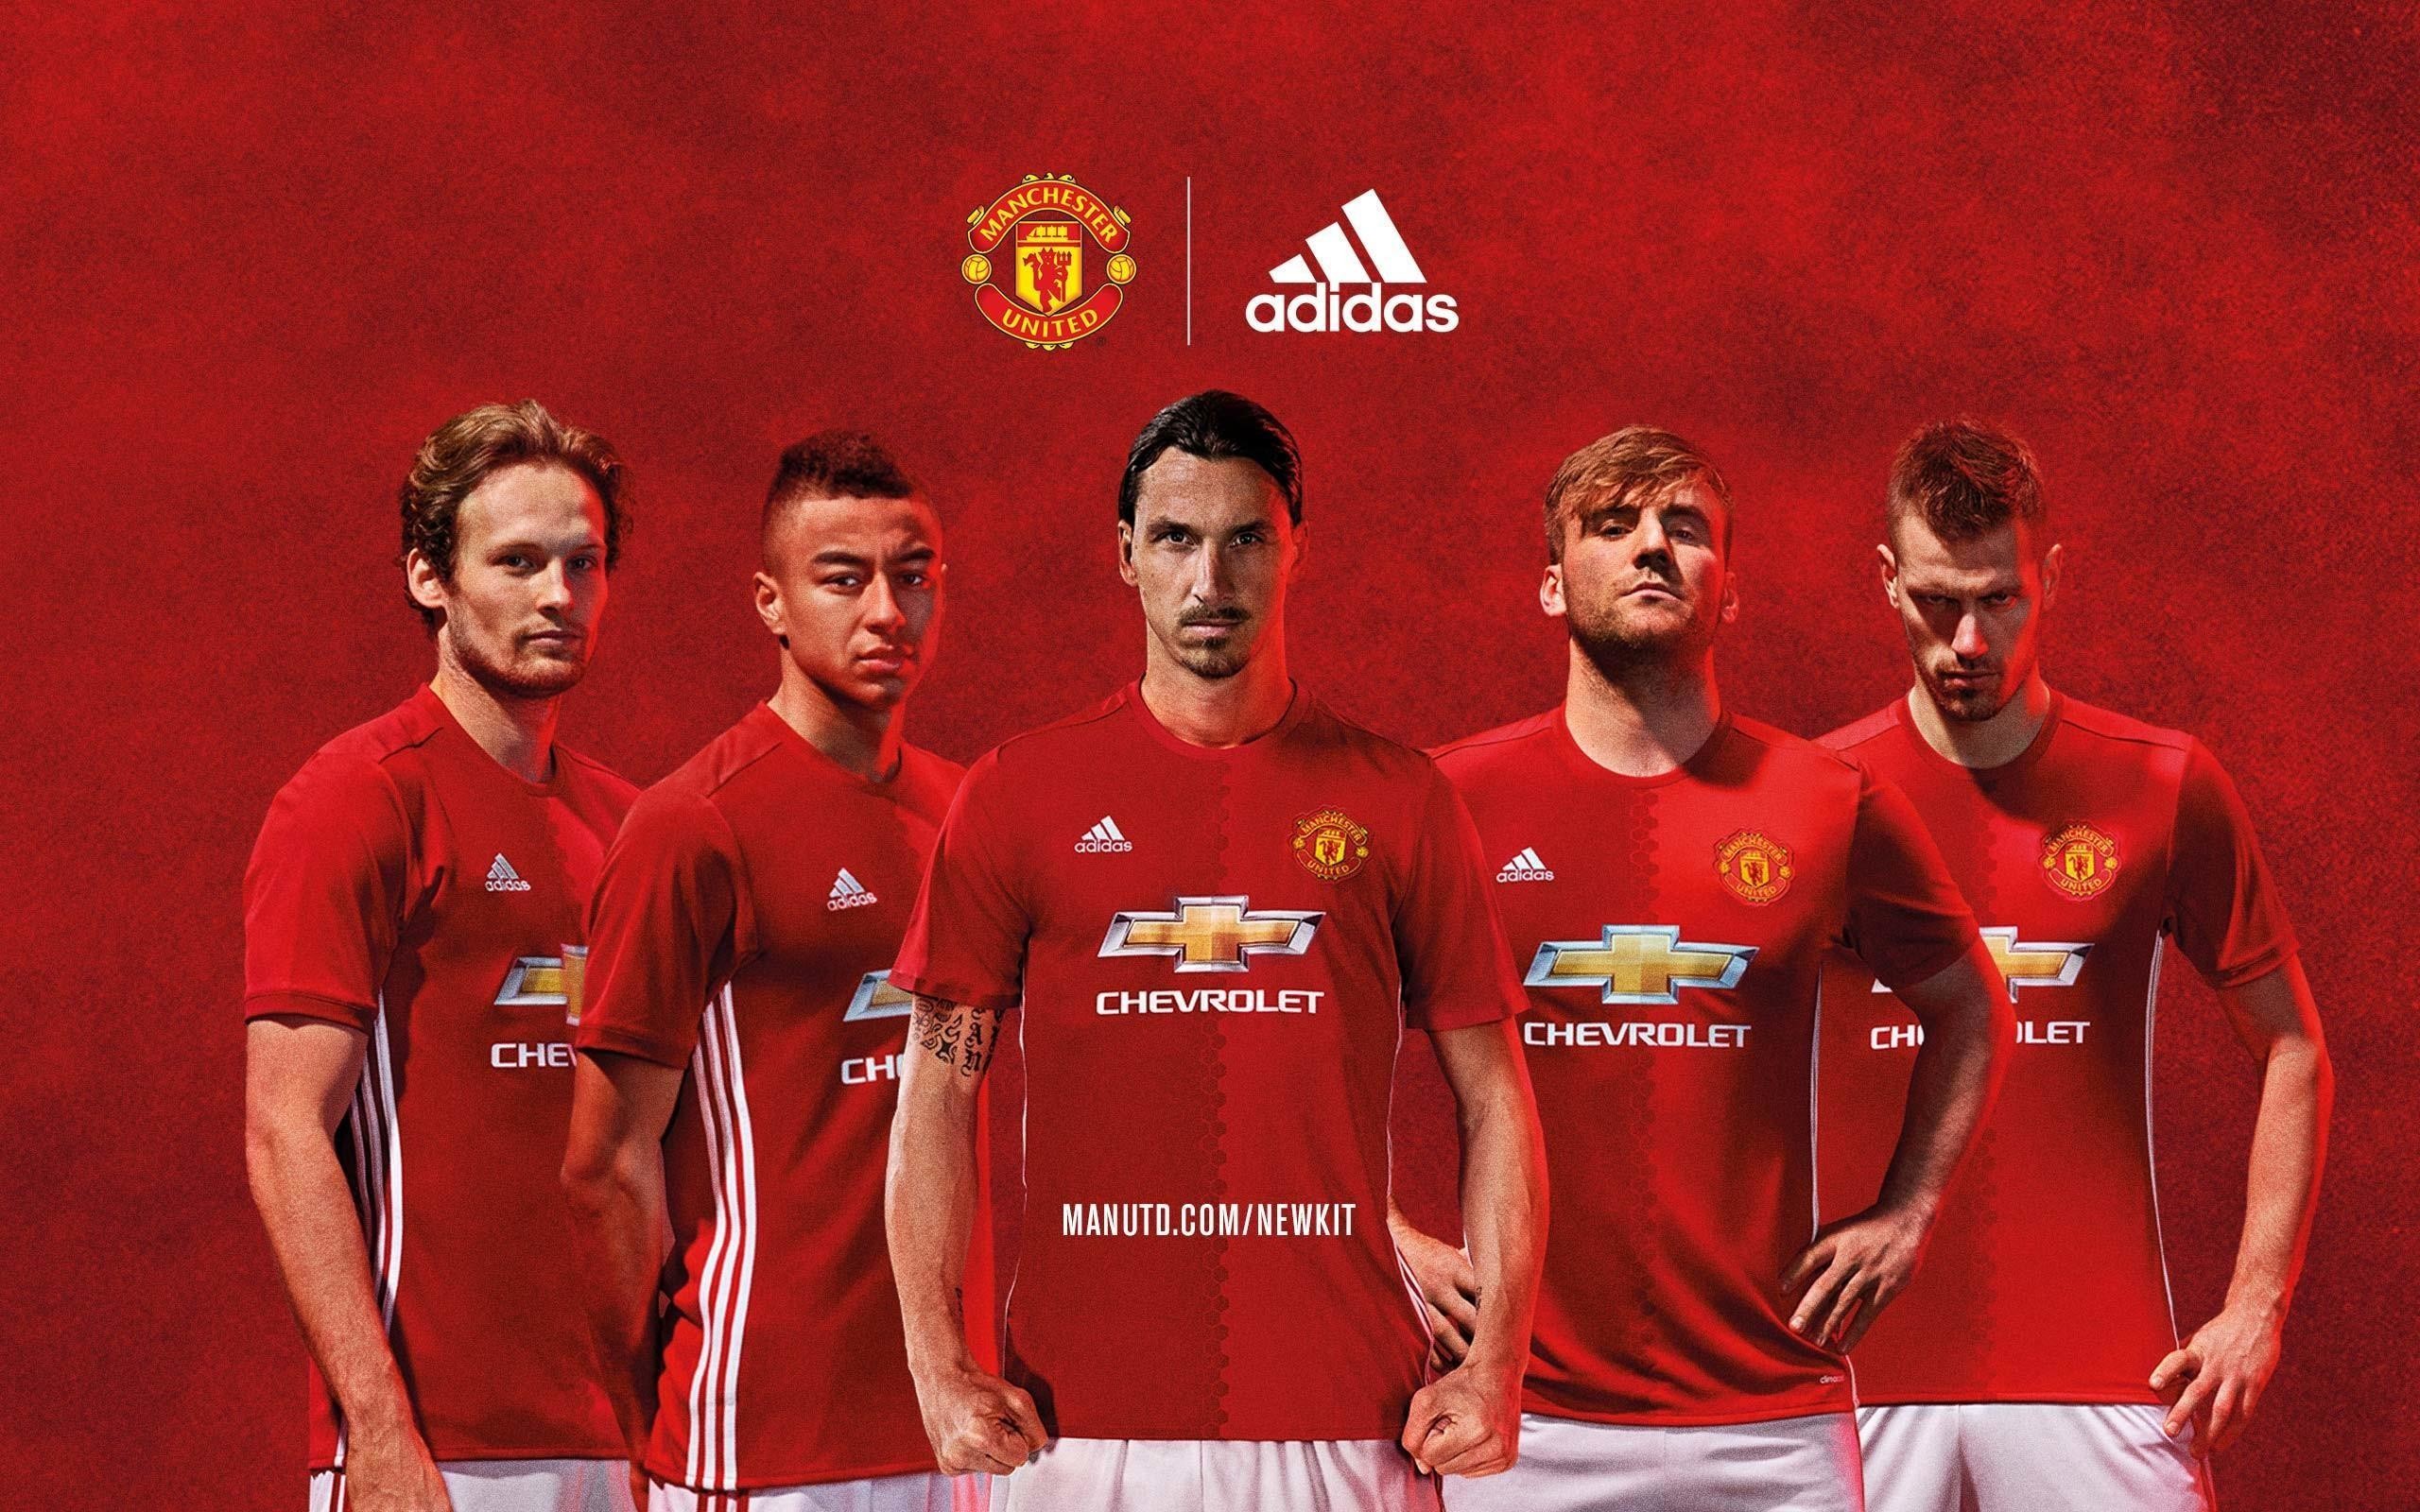 Adidas Manchester United Wallpapers